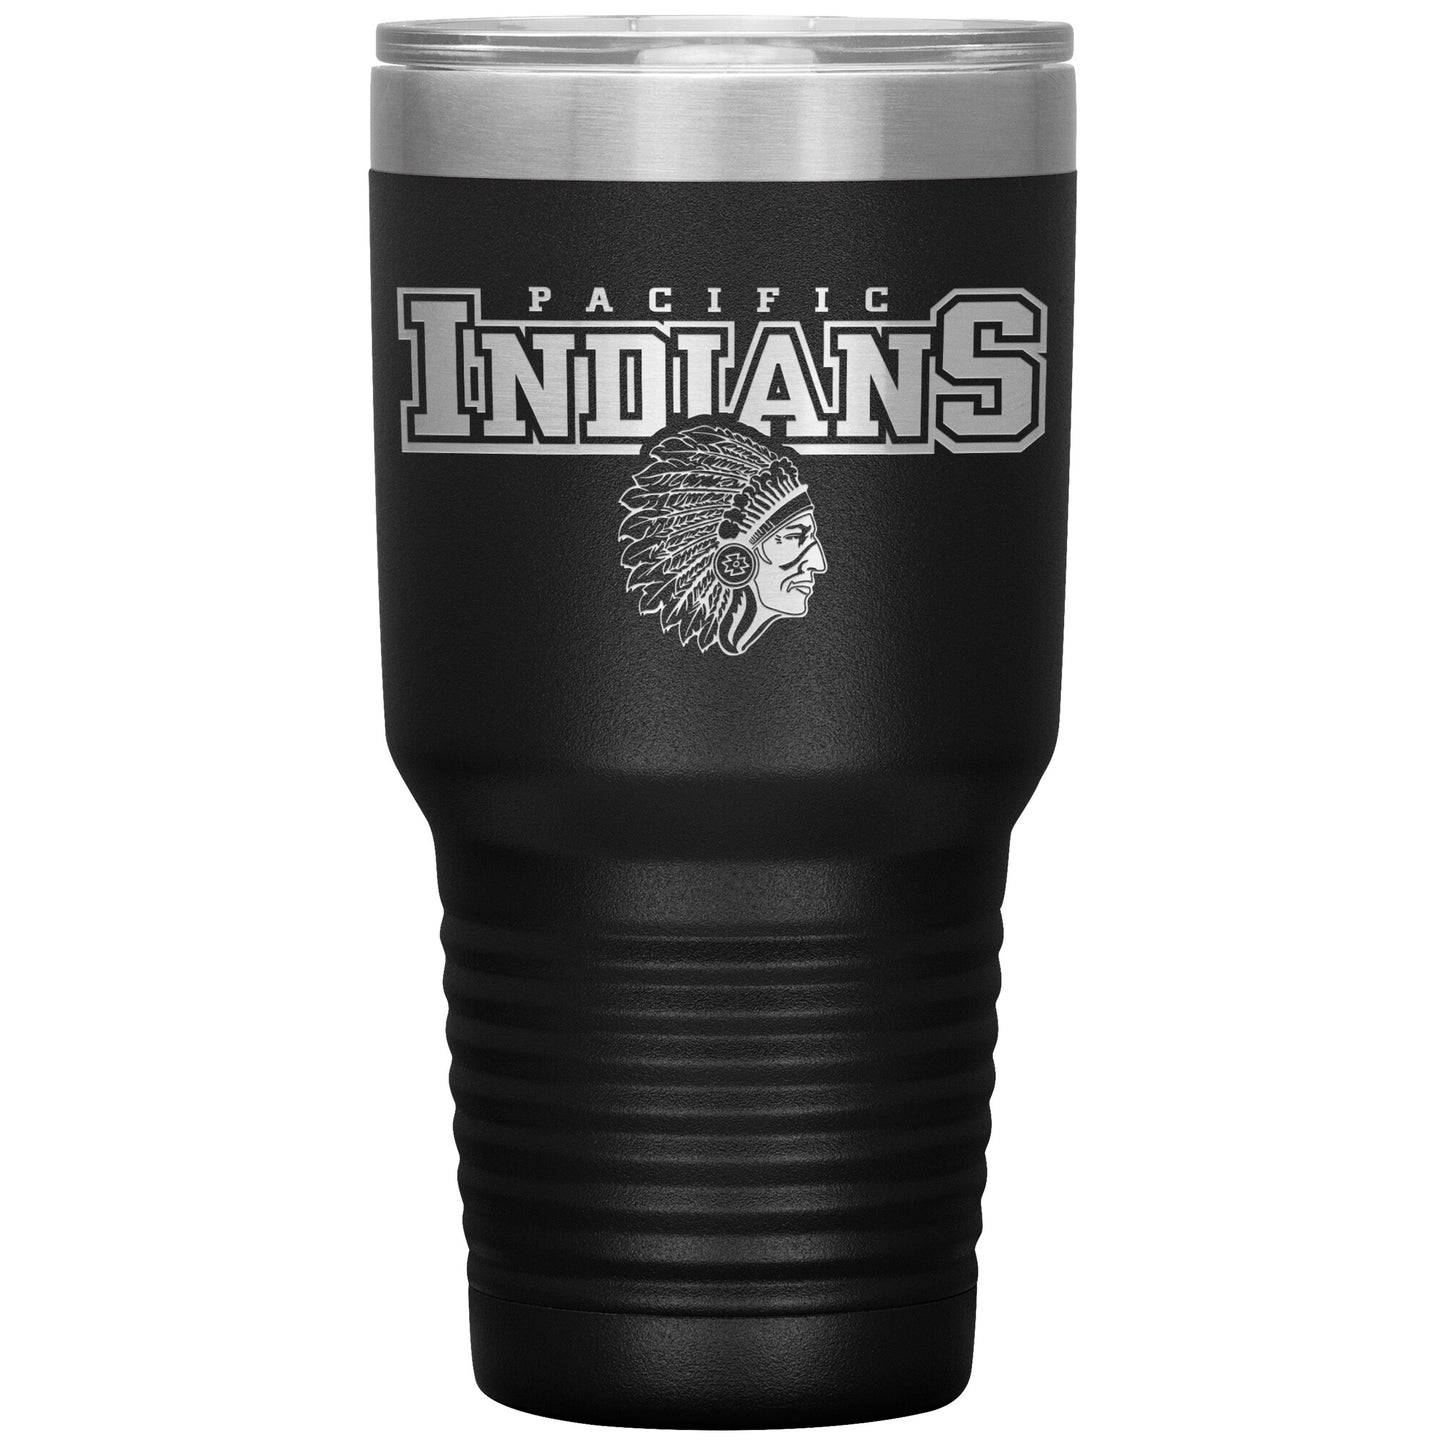 Pacific Indians Design 6 - Insulated Tumblers